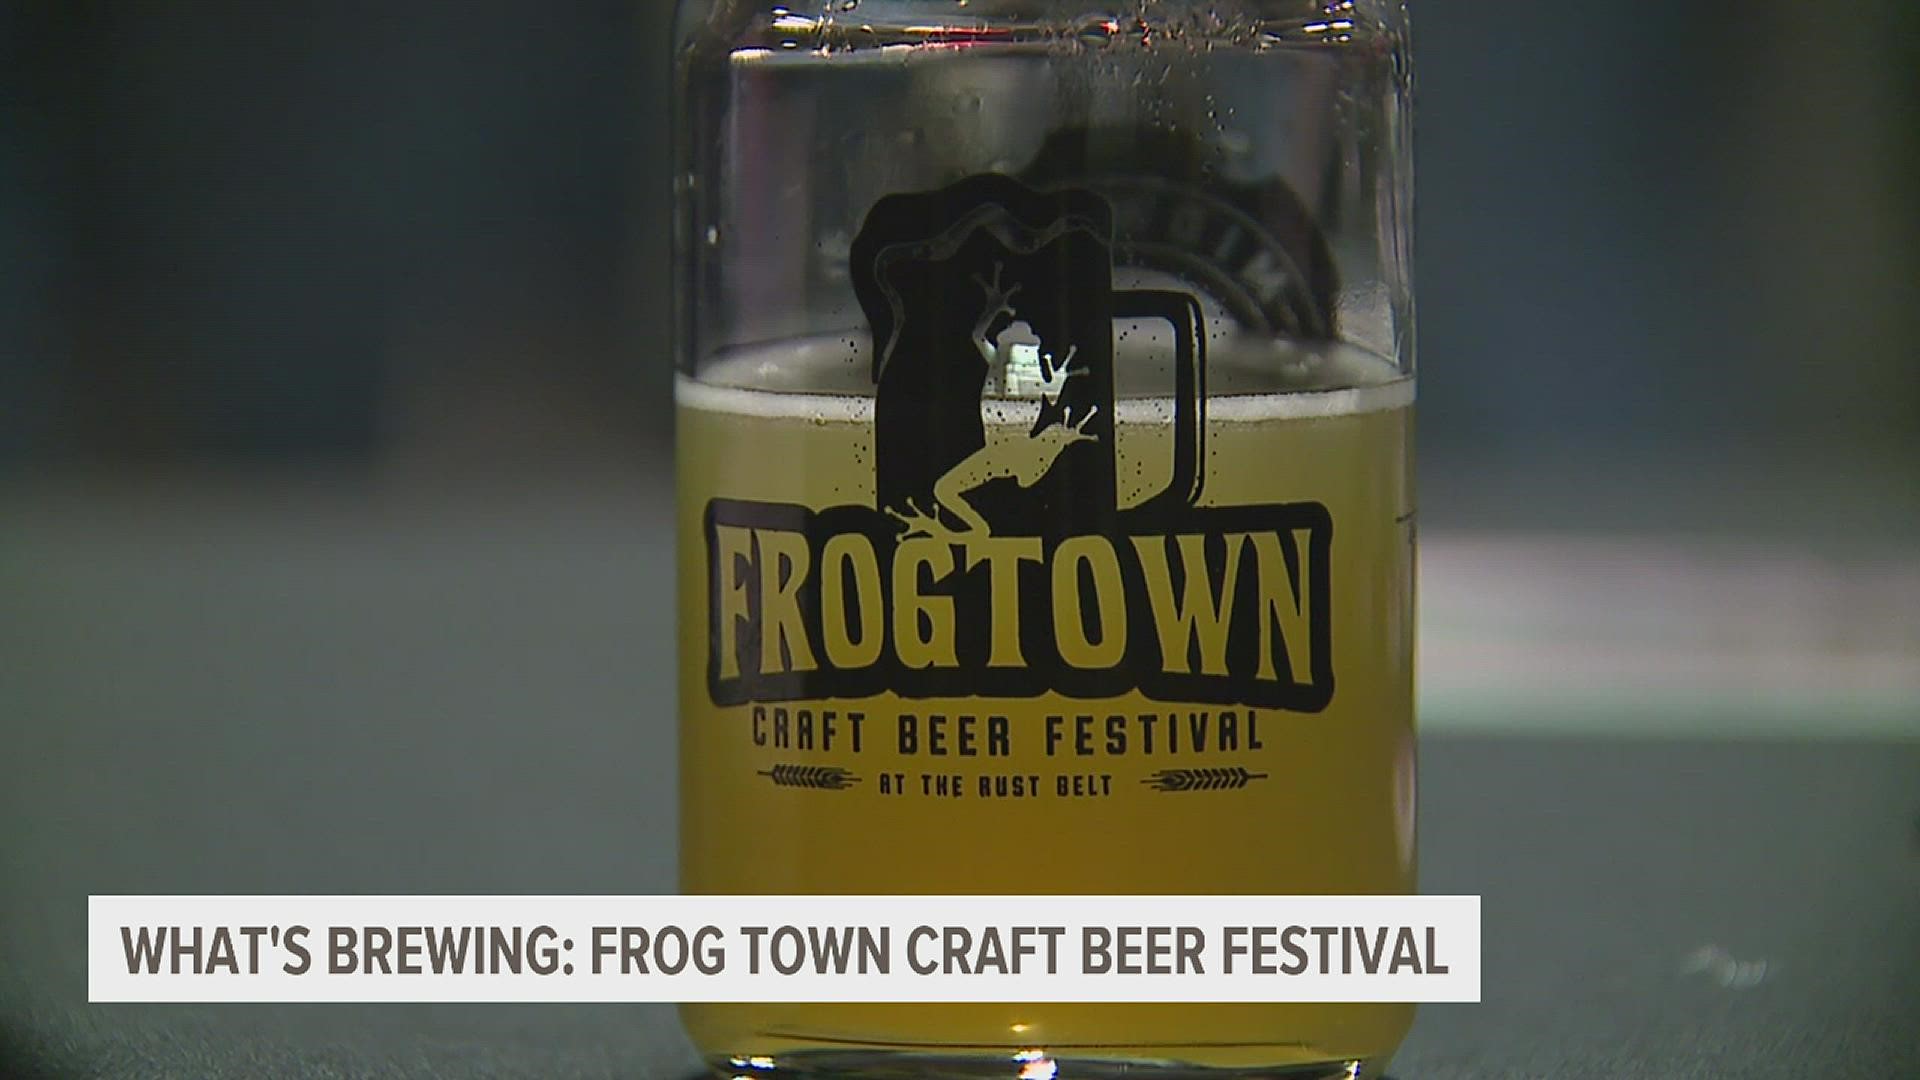 A craft beer festival is hopping back to the Quad Cities on Saturday, Nov. 26; here's how you can get in on the Frog Town fun!